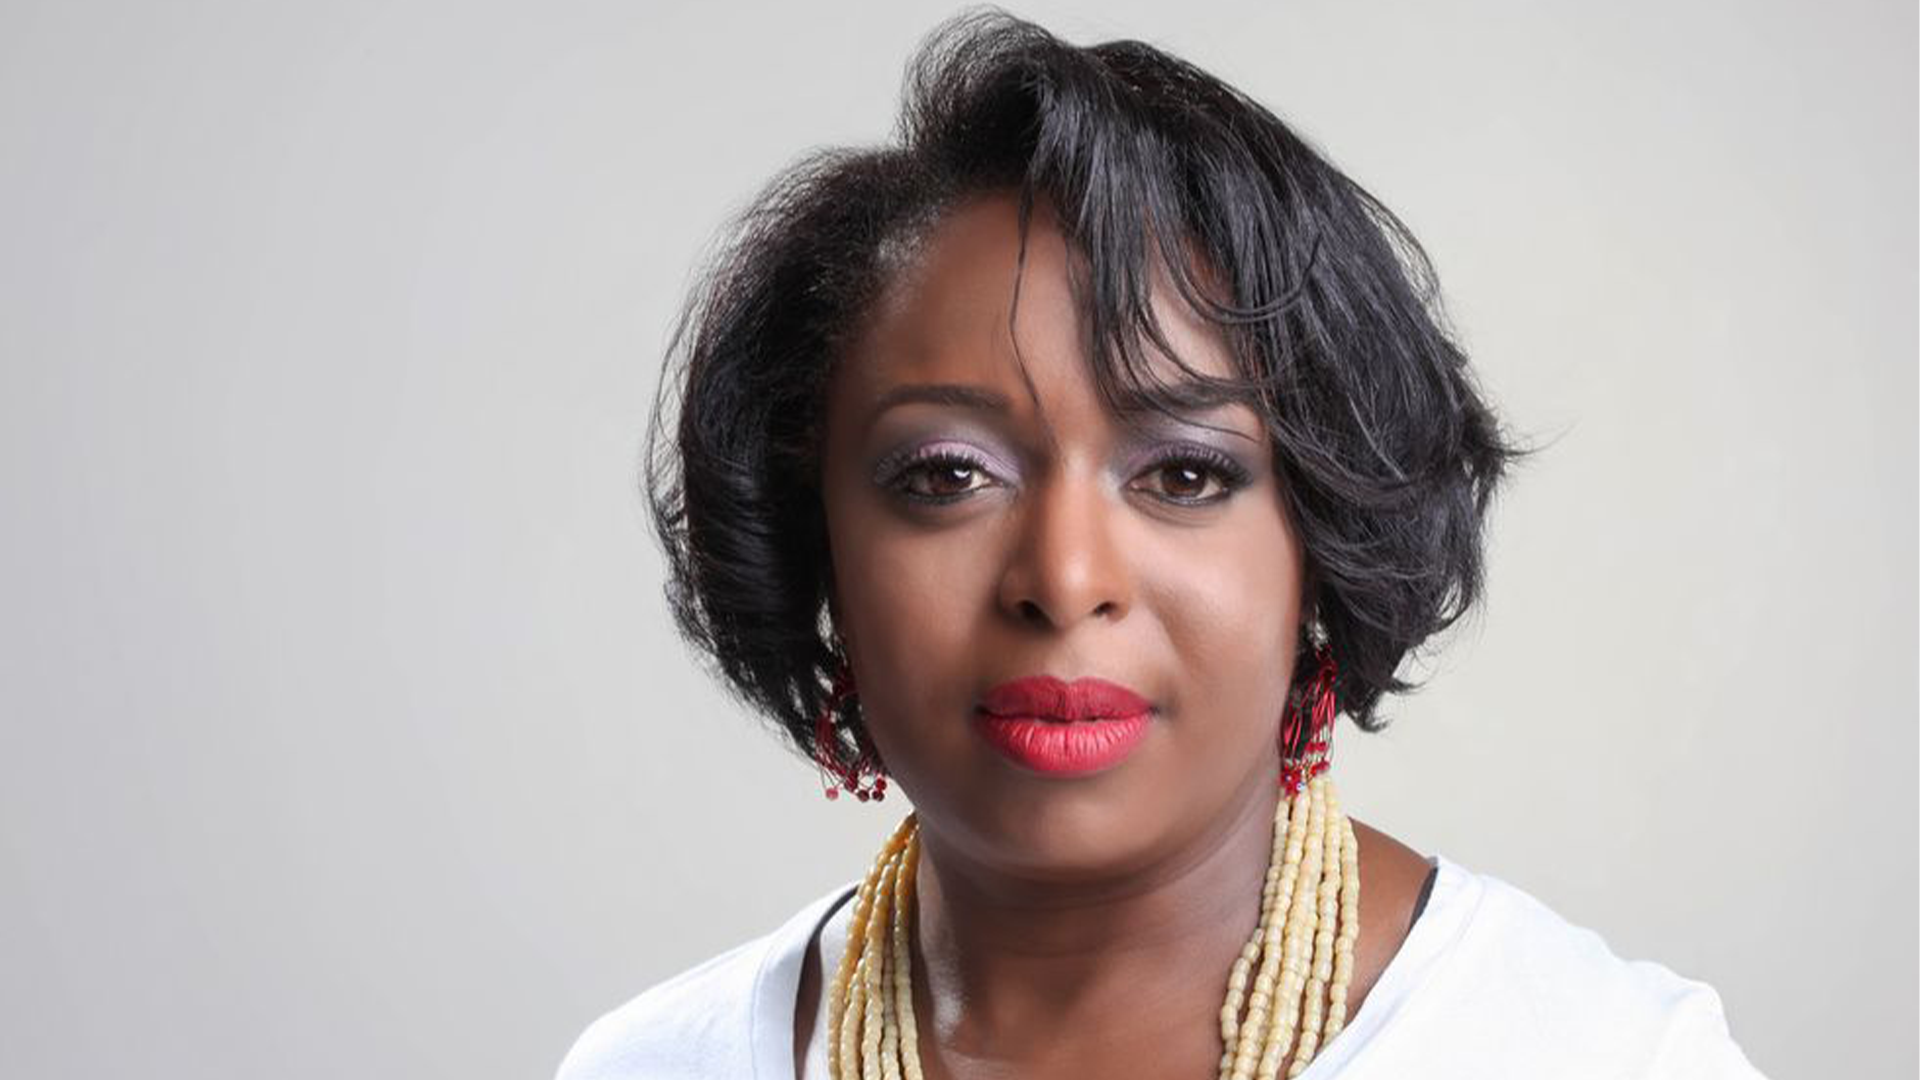 Kimberly Bryant And Black Girls Code Come To An Amicable Agreement After Previous Legal Action Against The Founder And Former CEO